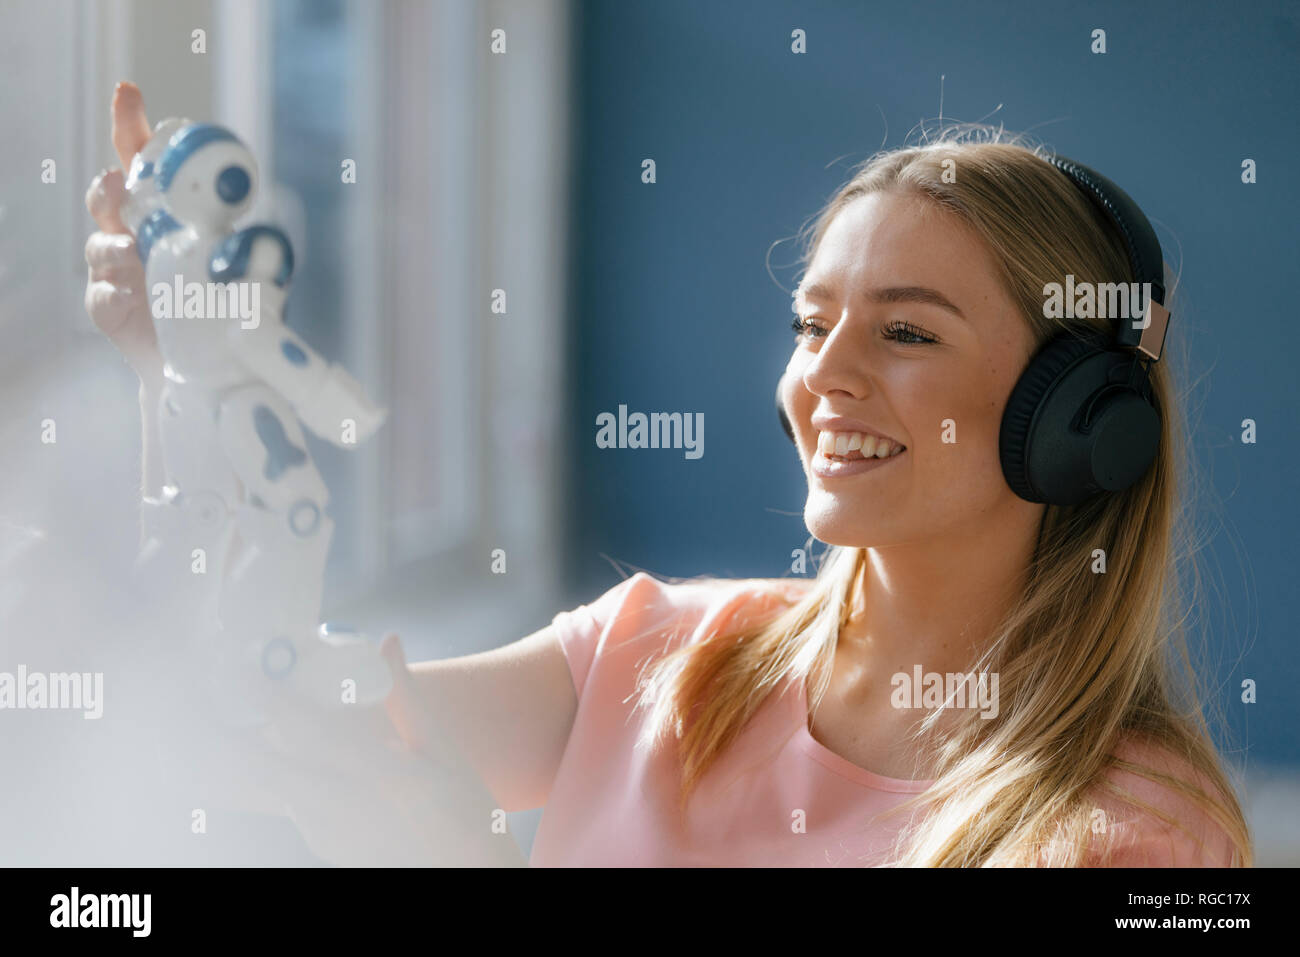 Portrait of smiling young woman with headphones looking at toy robot Stock Photo